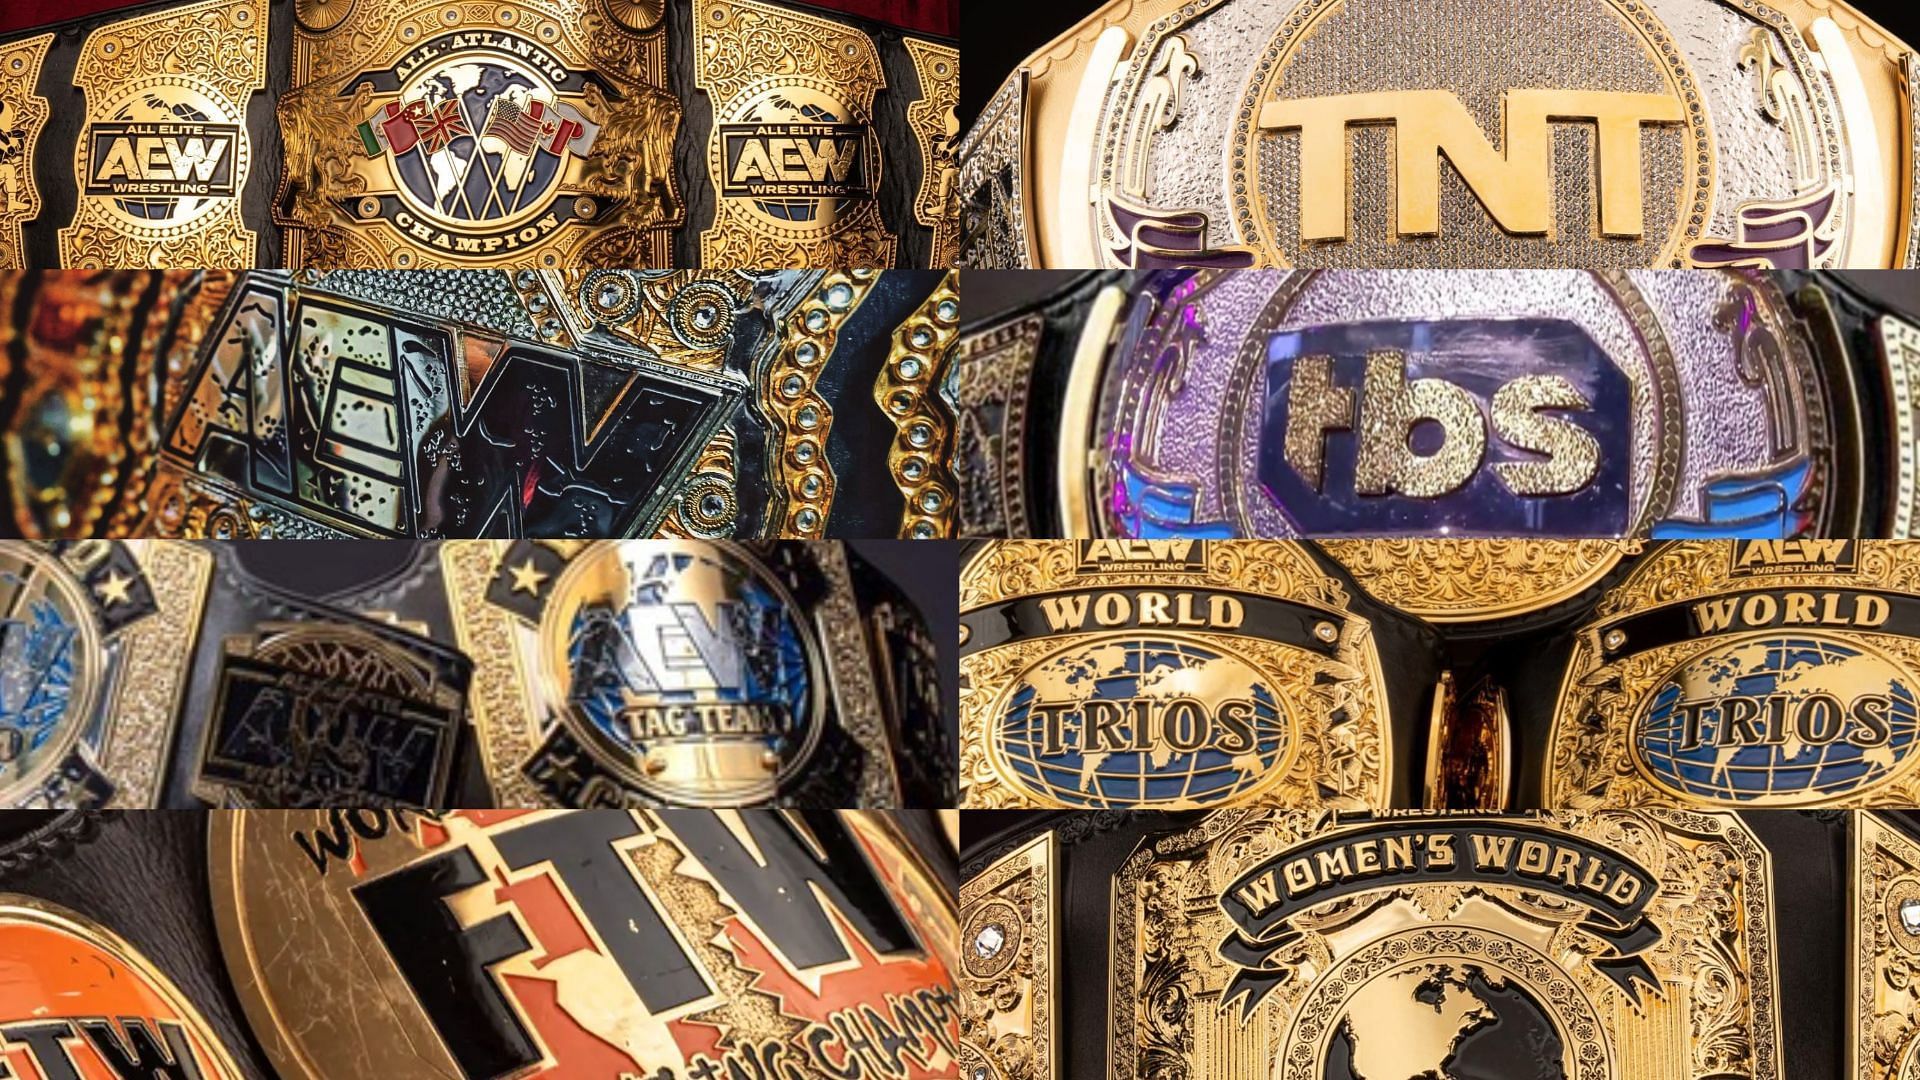 Which current AEW champion thought their title win was an &quot;F You&quot; to the fans?